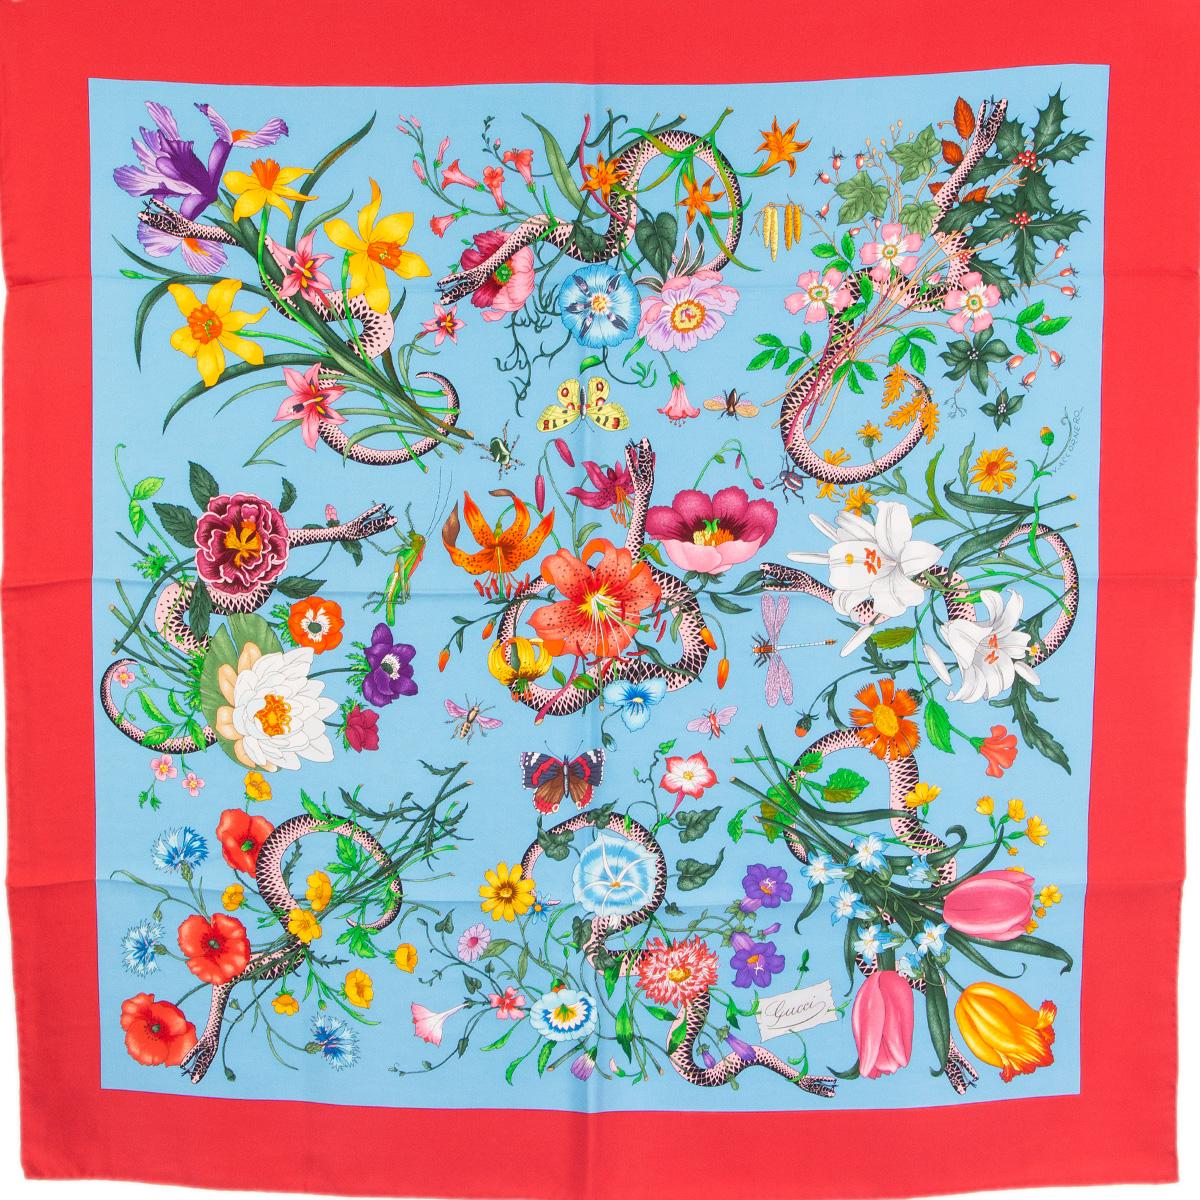 100% authentic  Gucci flora and snake printed scarf in pink and light blue silk (100%) featuring a stunning array of colorful flowers intertwined with coiling snakes-a symbol that has been established as one of Alessandro Michele's signature